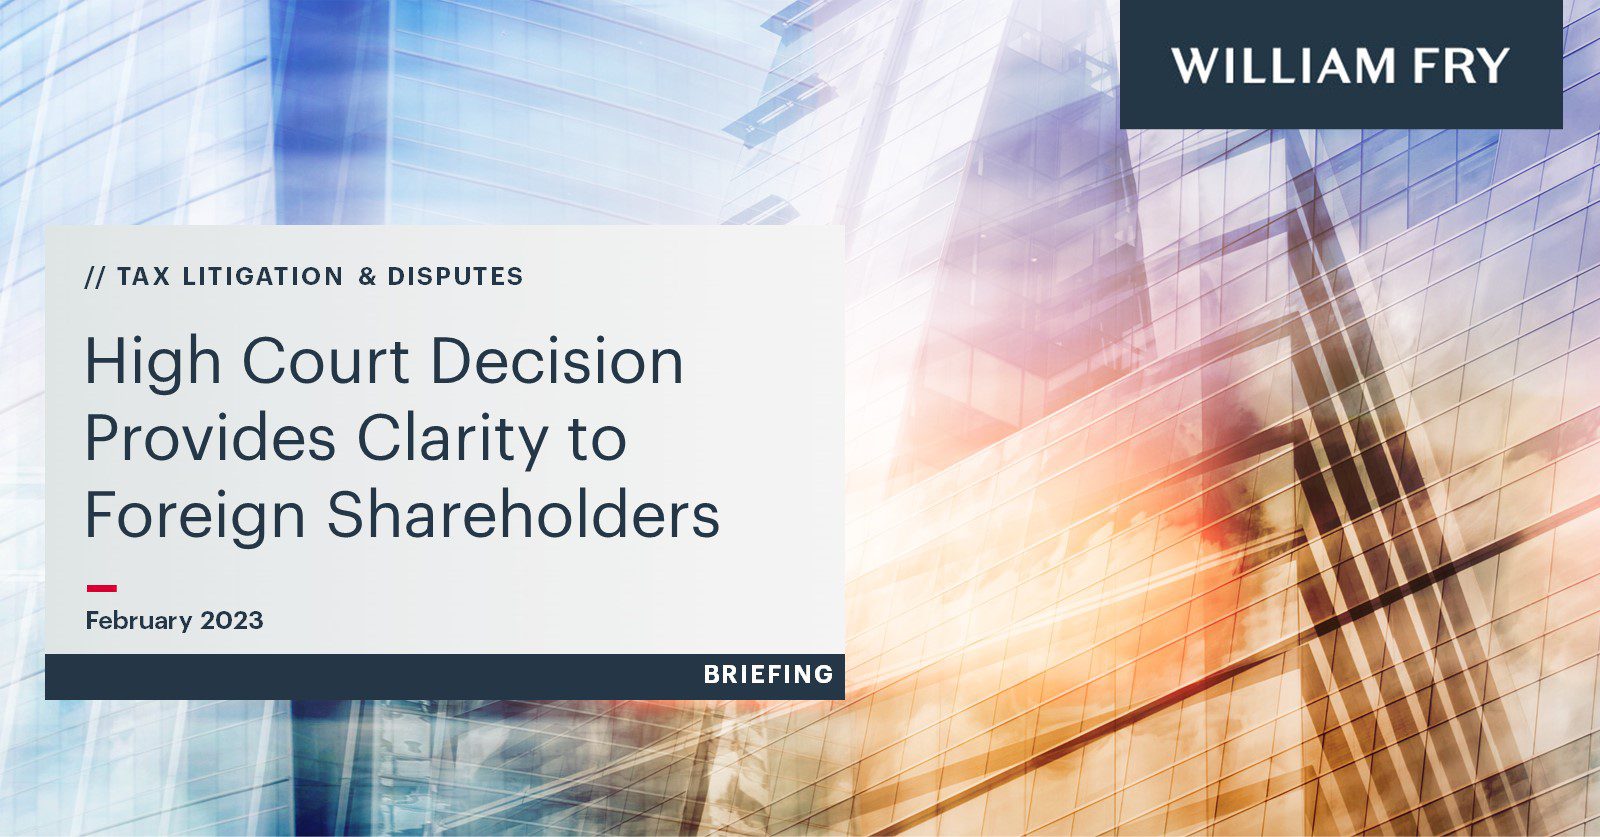 High Court Decision Provides Clarity to Foreign Shareholders